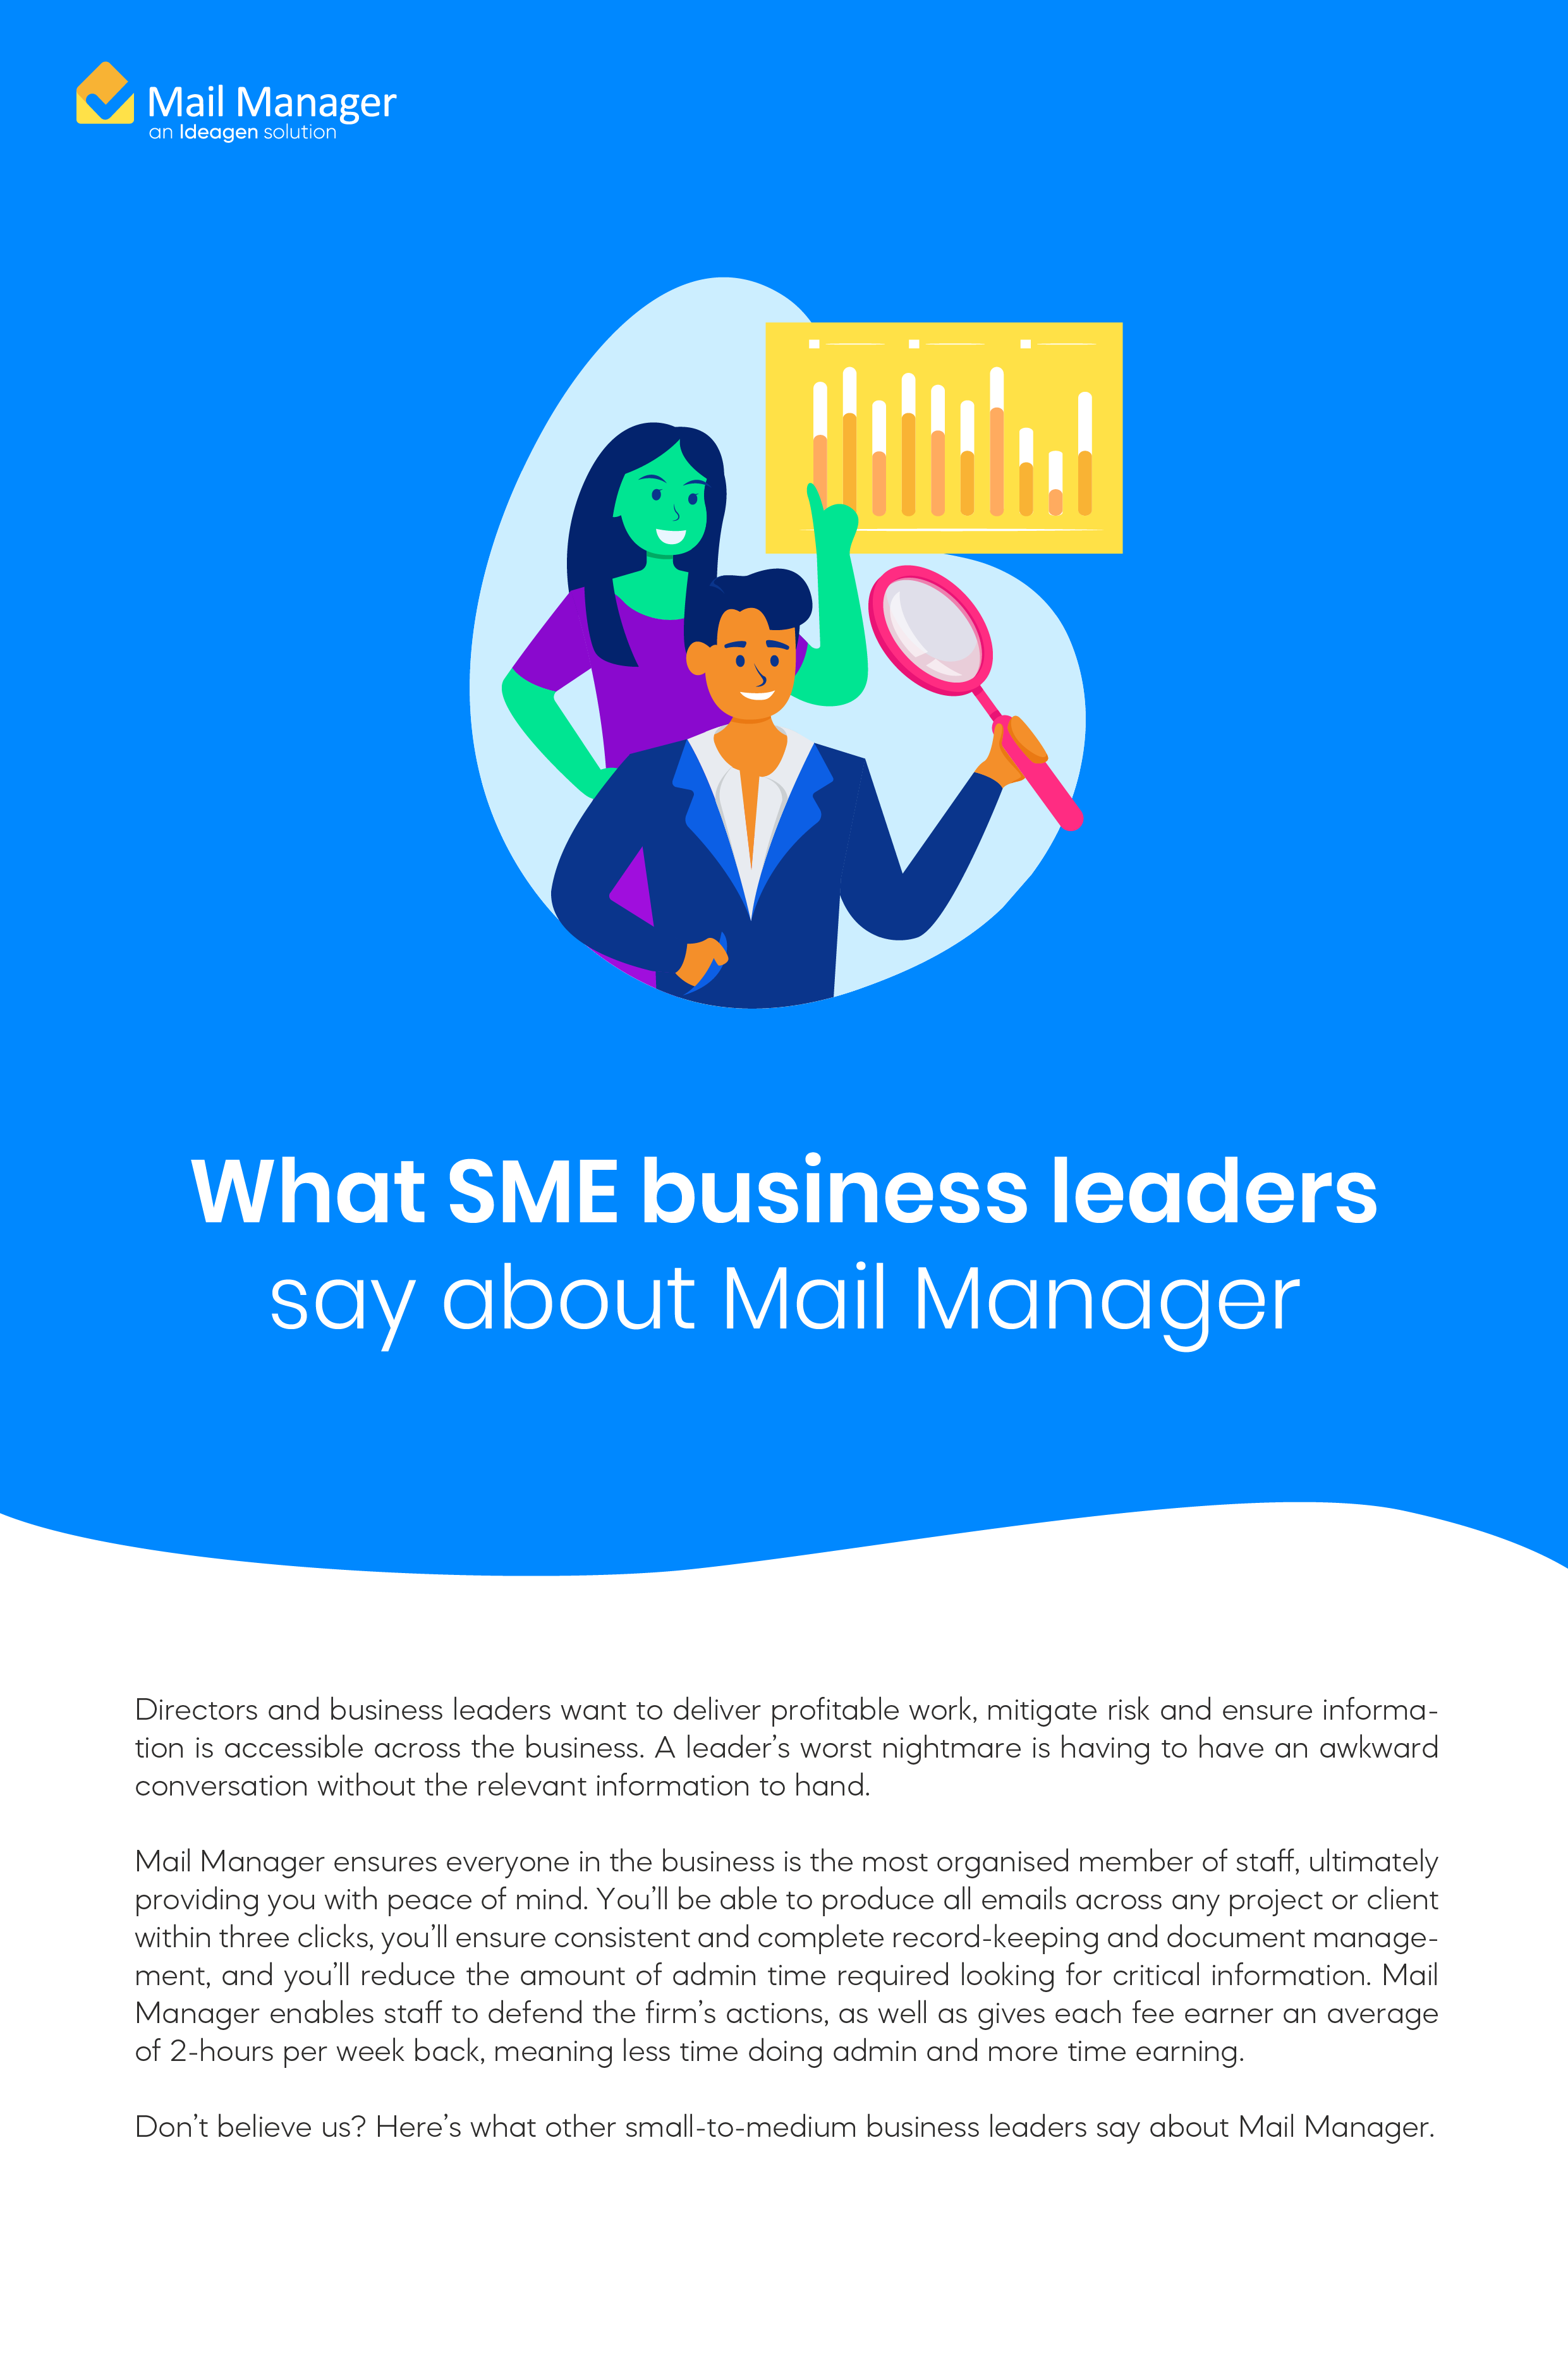 What SME business leaders say about Mail Manager-01